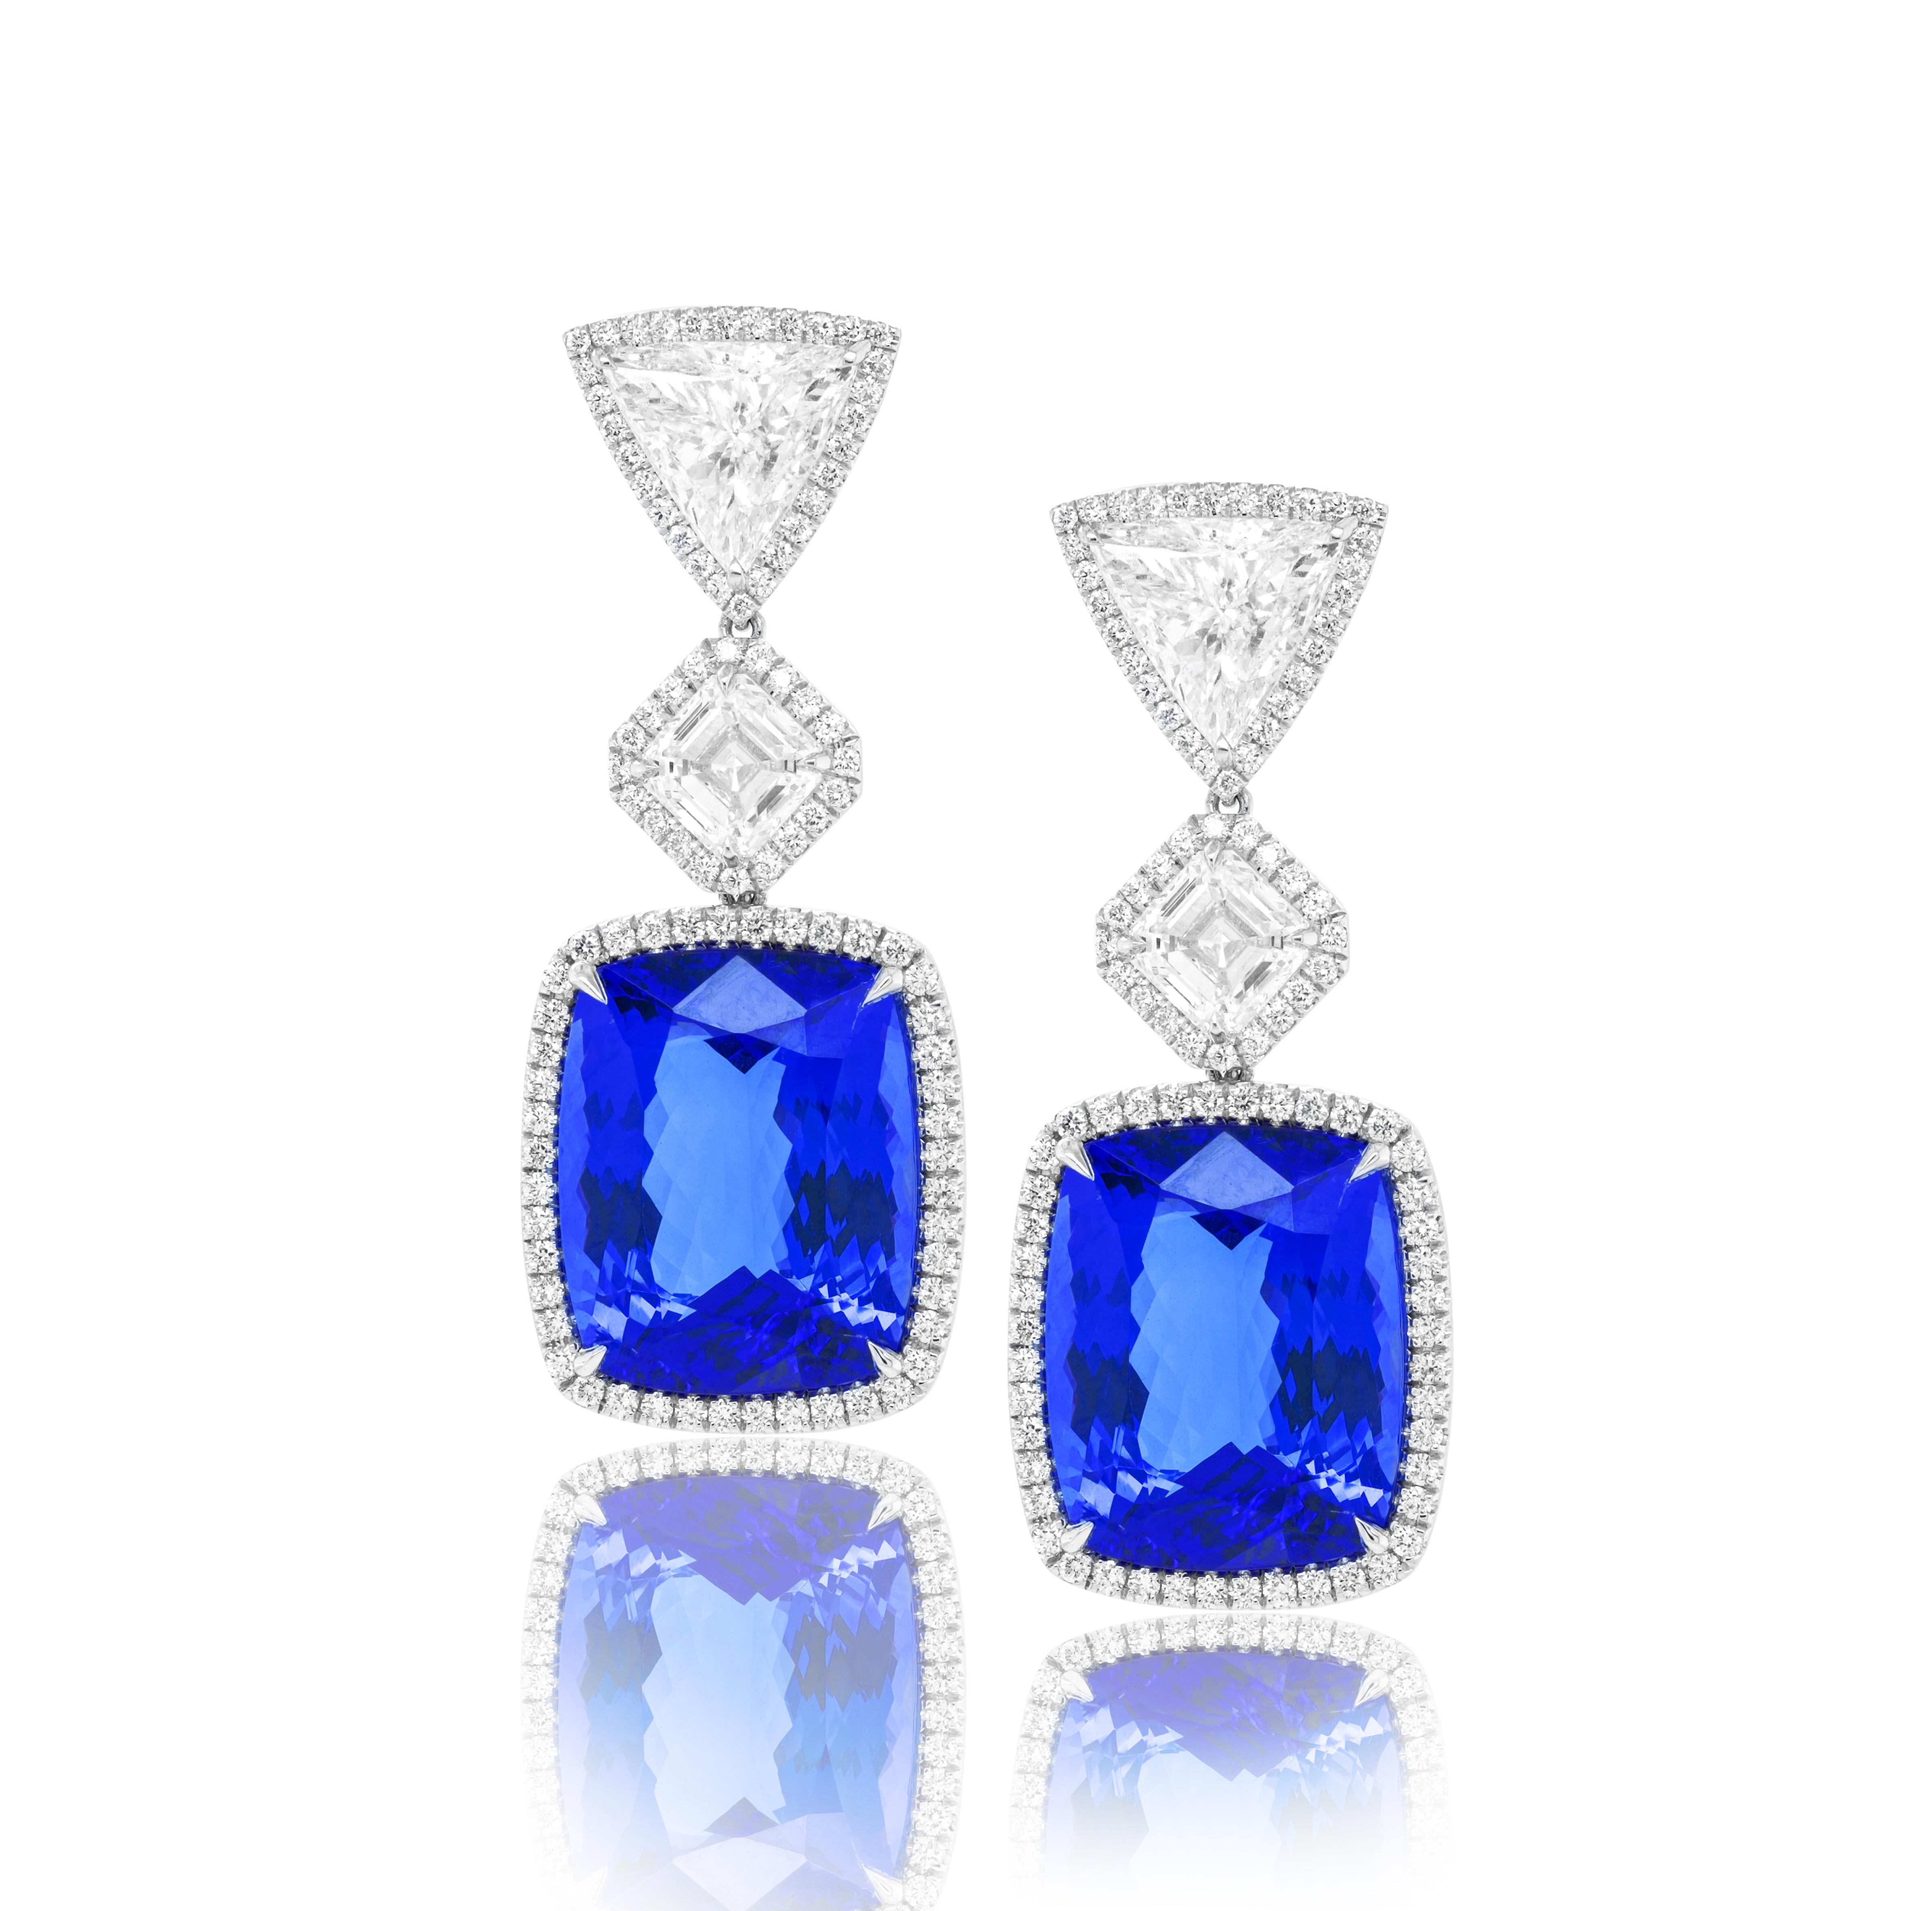 18kt white gold tanzanite and diamonds earrings, features 33.79 gia certifed tanzanites (16.89ct & 16.90ct) and 2.62ct  gia certified asscher cuts diamonds (1.32 i-vs2 ass+1.30i-vs2 ass) and 3.06ct of two trillians diamonds surrounded by 1.77ct of